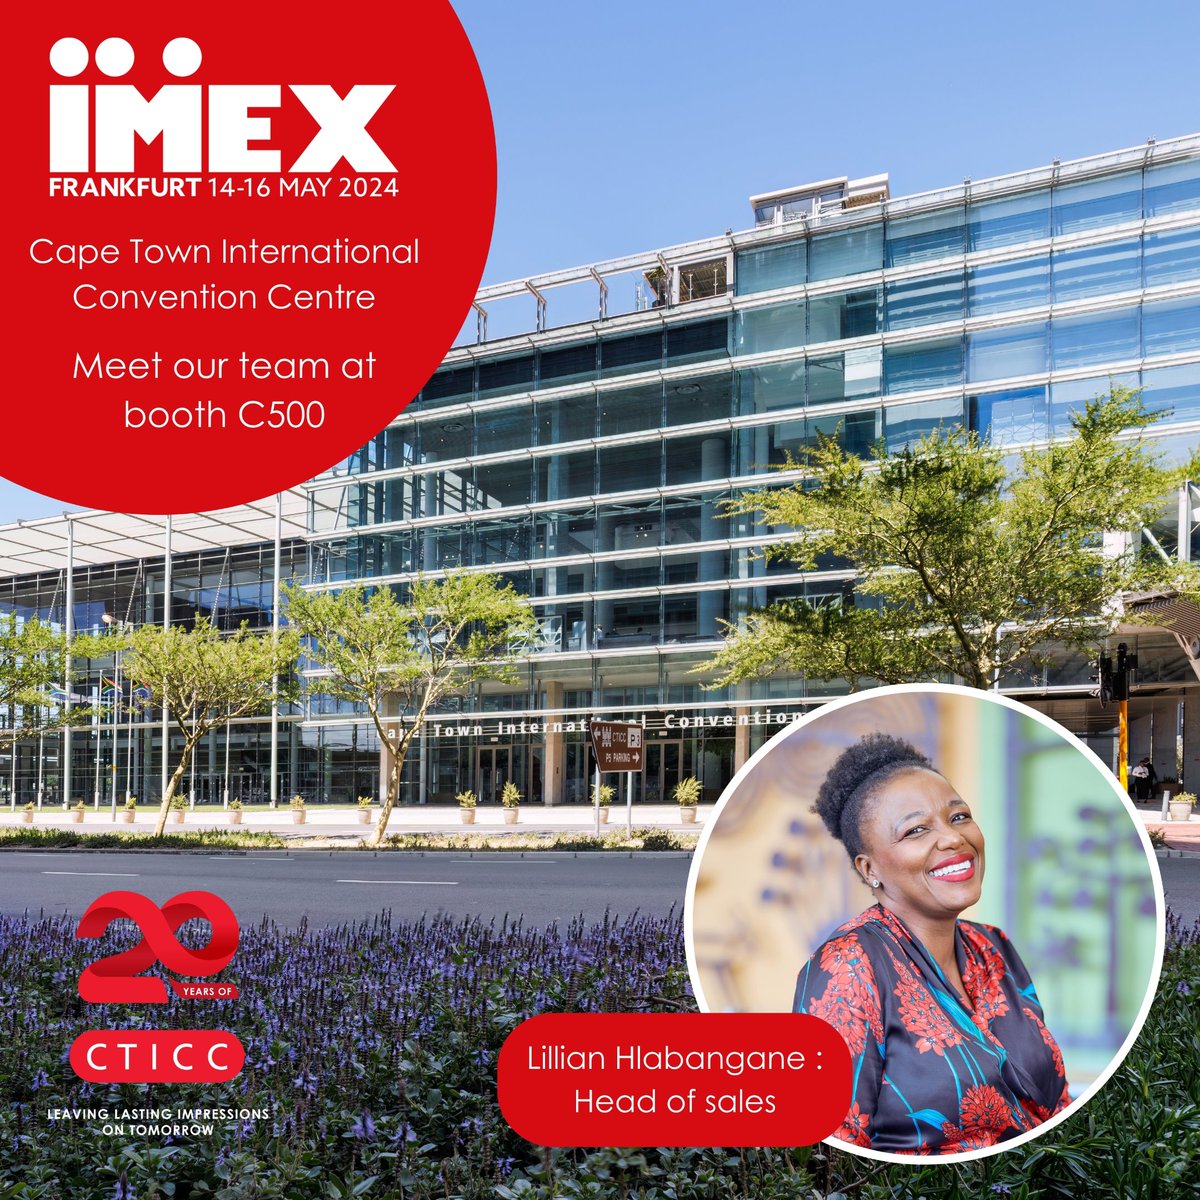 Meet Lillian our Head of Sales at @IMEX_Group Frankfurt and discover CTICC's outstanding venue versatility and world-class service.
#20YearsOfExcellence 
#20YearsOfCTICC 
#IMEXFrankfurt2024